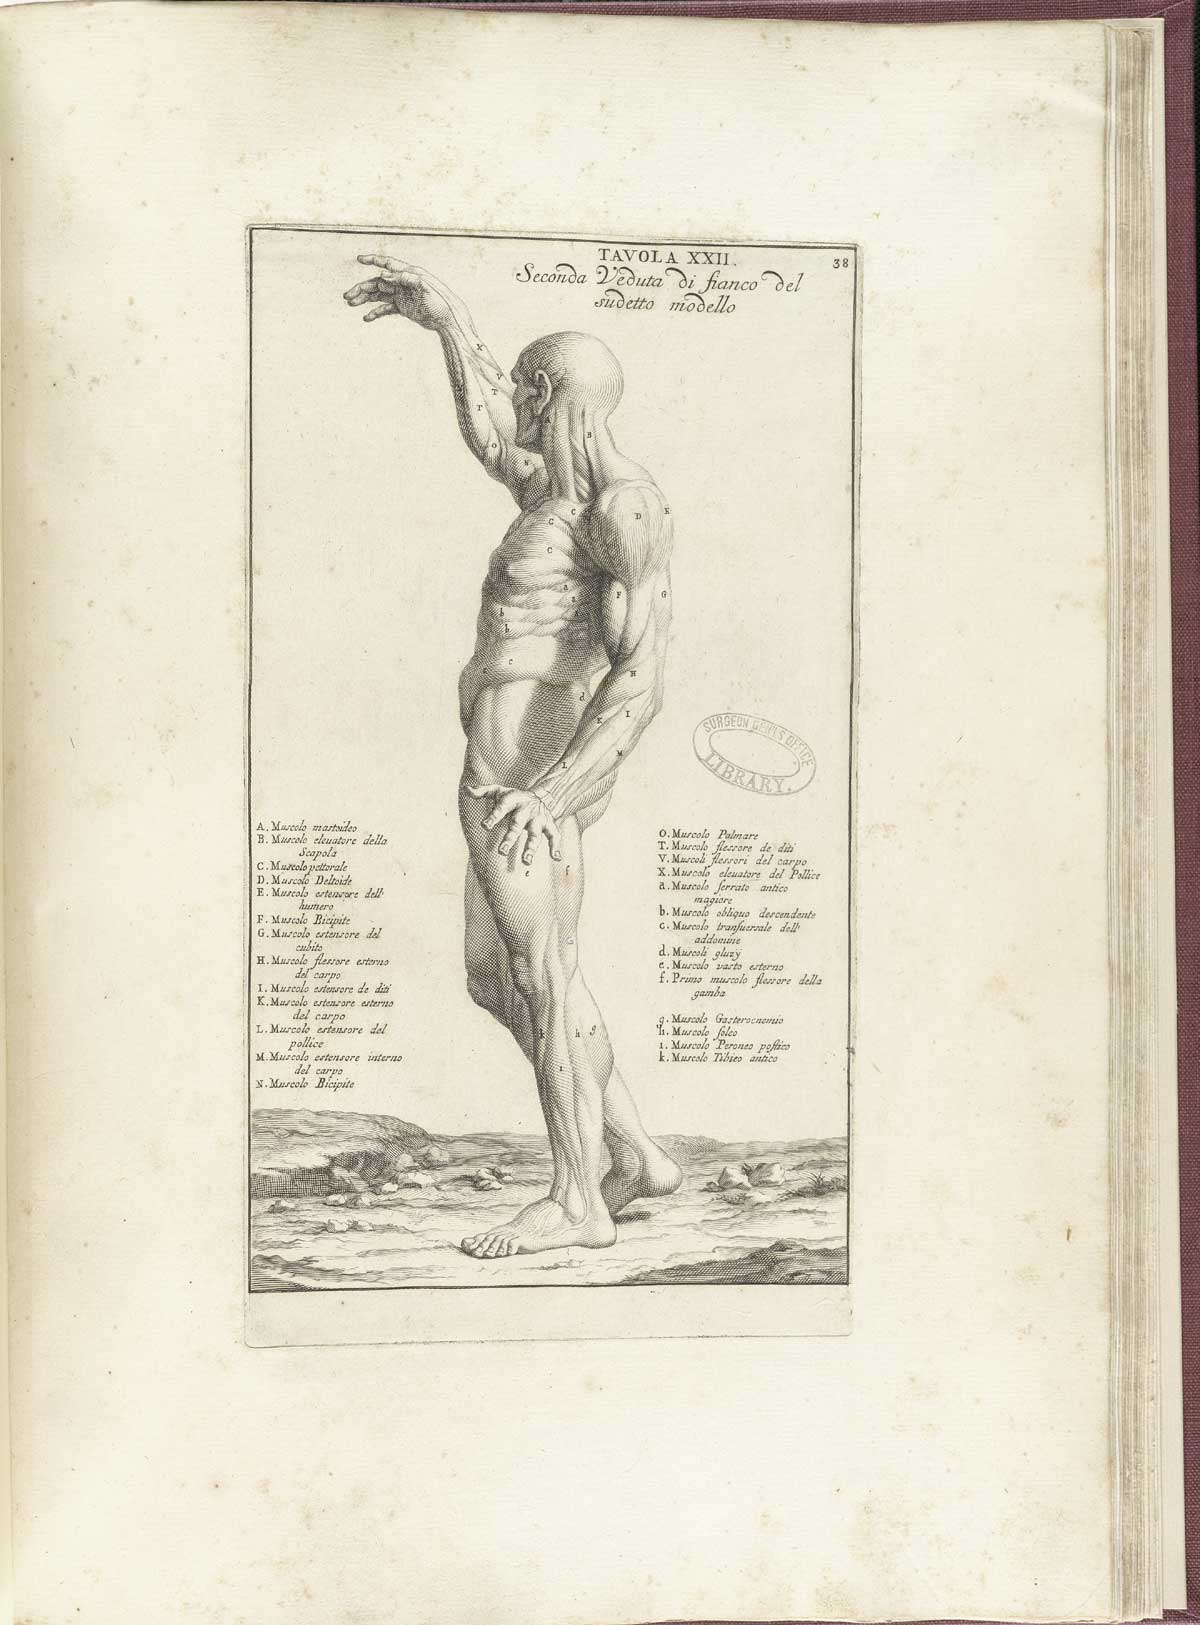 Engraving of a standing, muscle figure with right arm raised viewed from the rear with flesh removed to show detail of the muscles of the entire front of the body including arms, legs, back, and buttocks; from Bernardino Genga’s Anatomia per uso et intelligenza del disegno, NLM Call no.: WZ 250 G329an 1691.